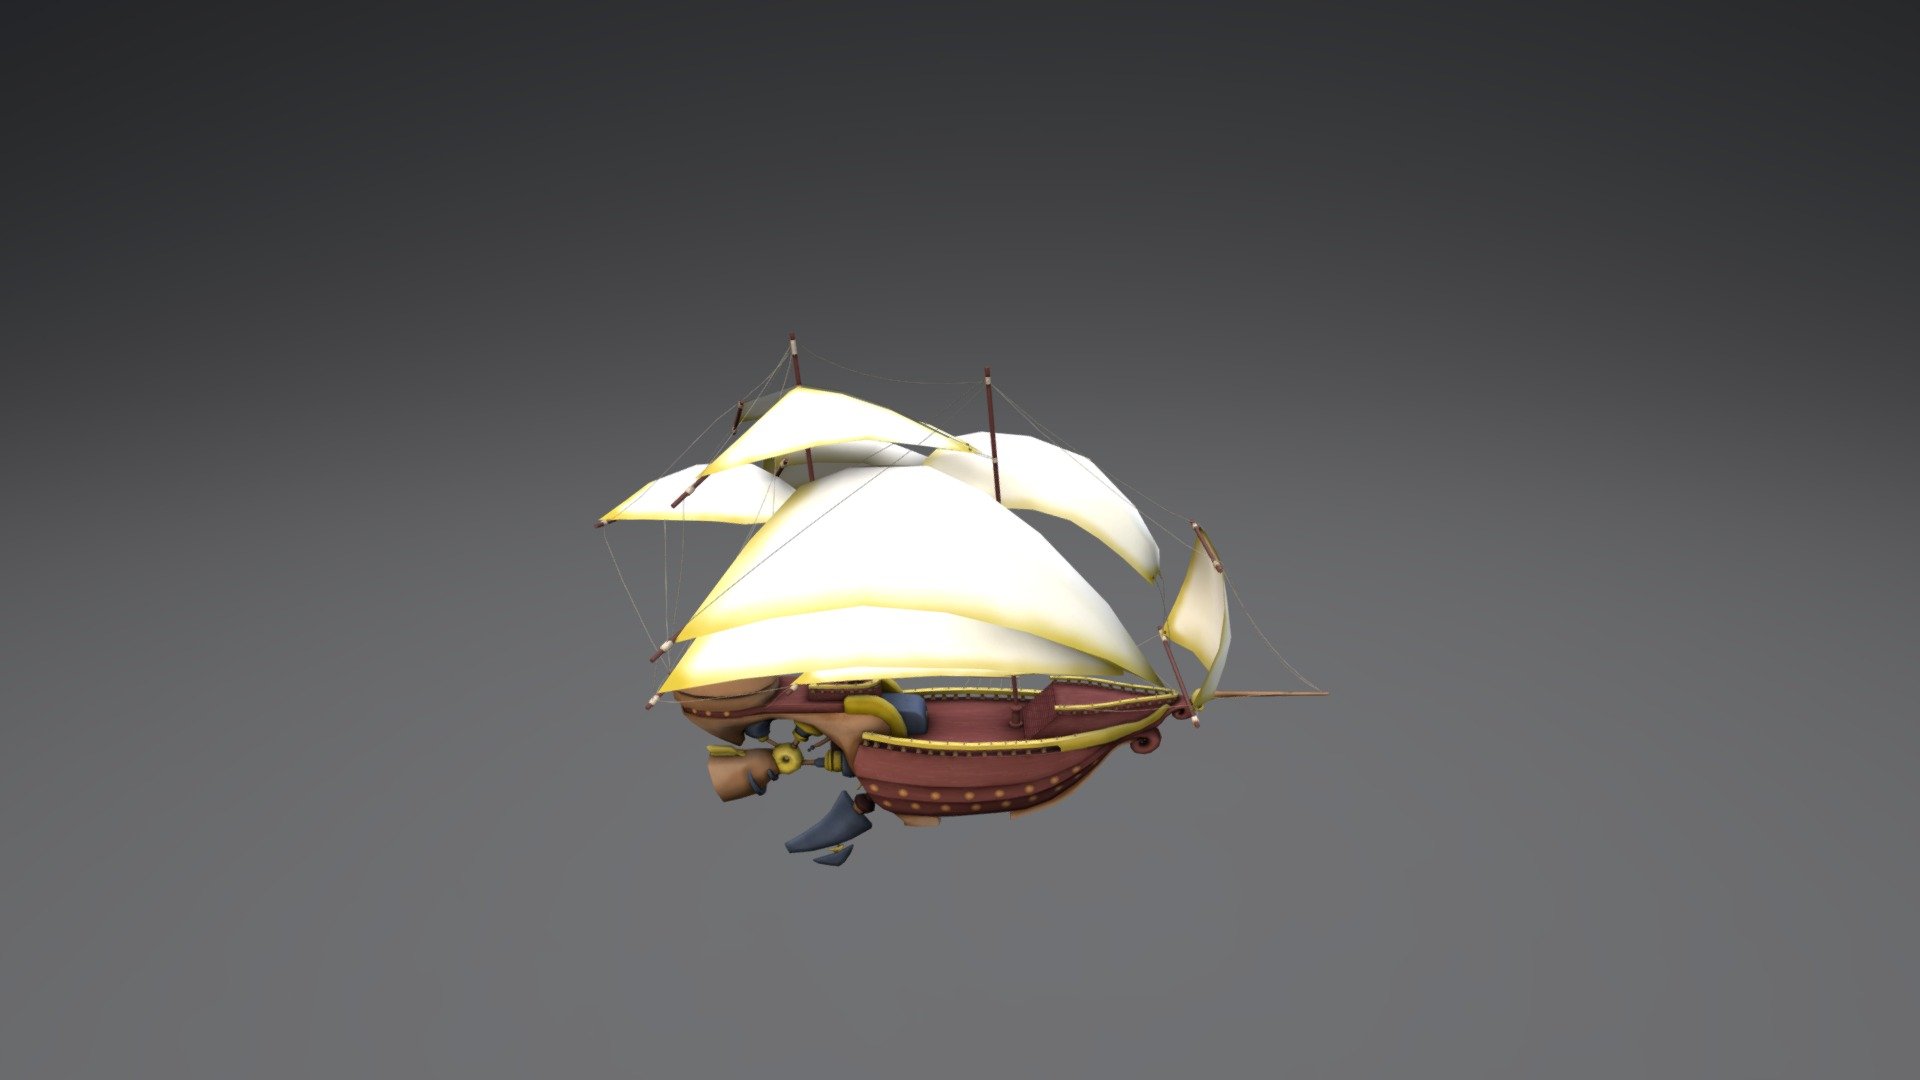 This model was inspired by concept art for Treasure Planet 2, created by Yarrow Cheney (http://animatedviews.com/2014/buried-treasure-the-ill-fated-voyage-to-treasure-planet-2/). Modeled in Maya with a total of 16,688 triangles with the intent for use in a gaming/real-time environment. Hand painted in zBrush. Detailed in Photoshop 3d model